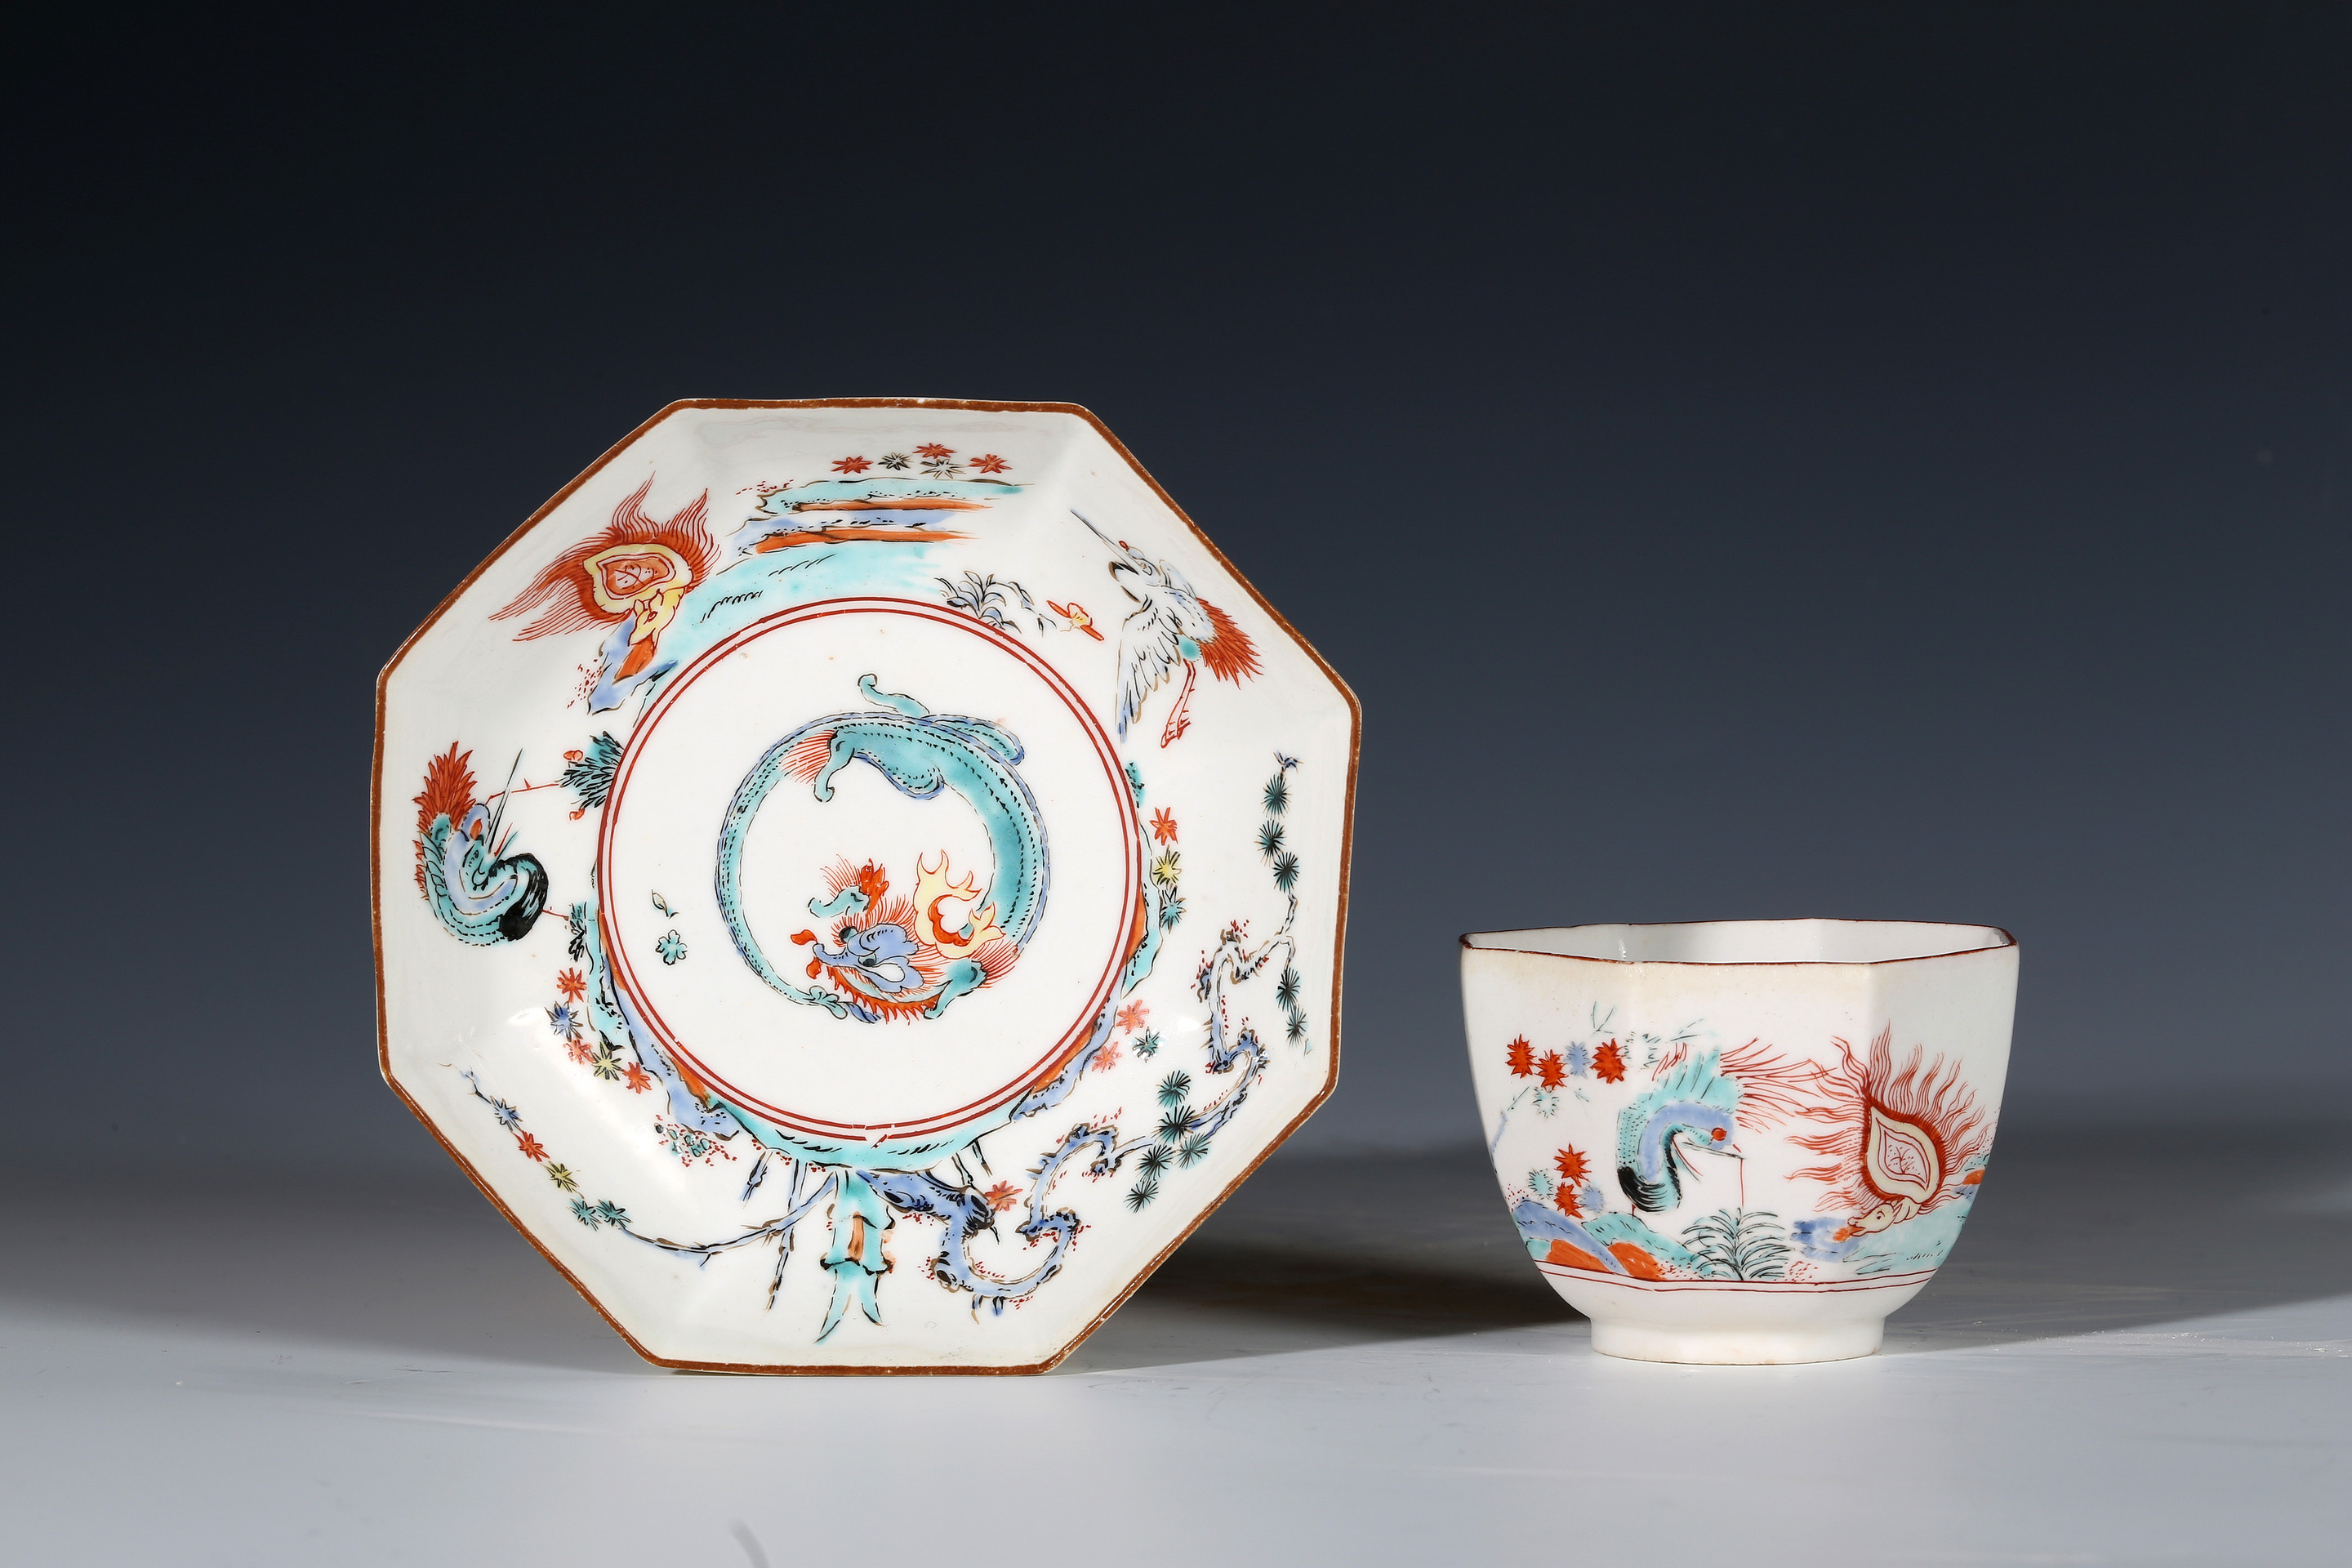 Chelsea Kakiemon Octagonal Teabowl and Saucer, With a Dragon and Flaming Tortoise